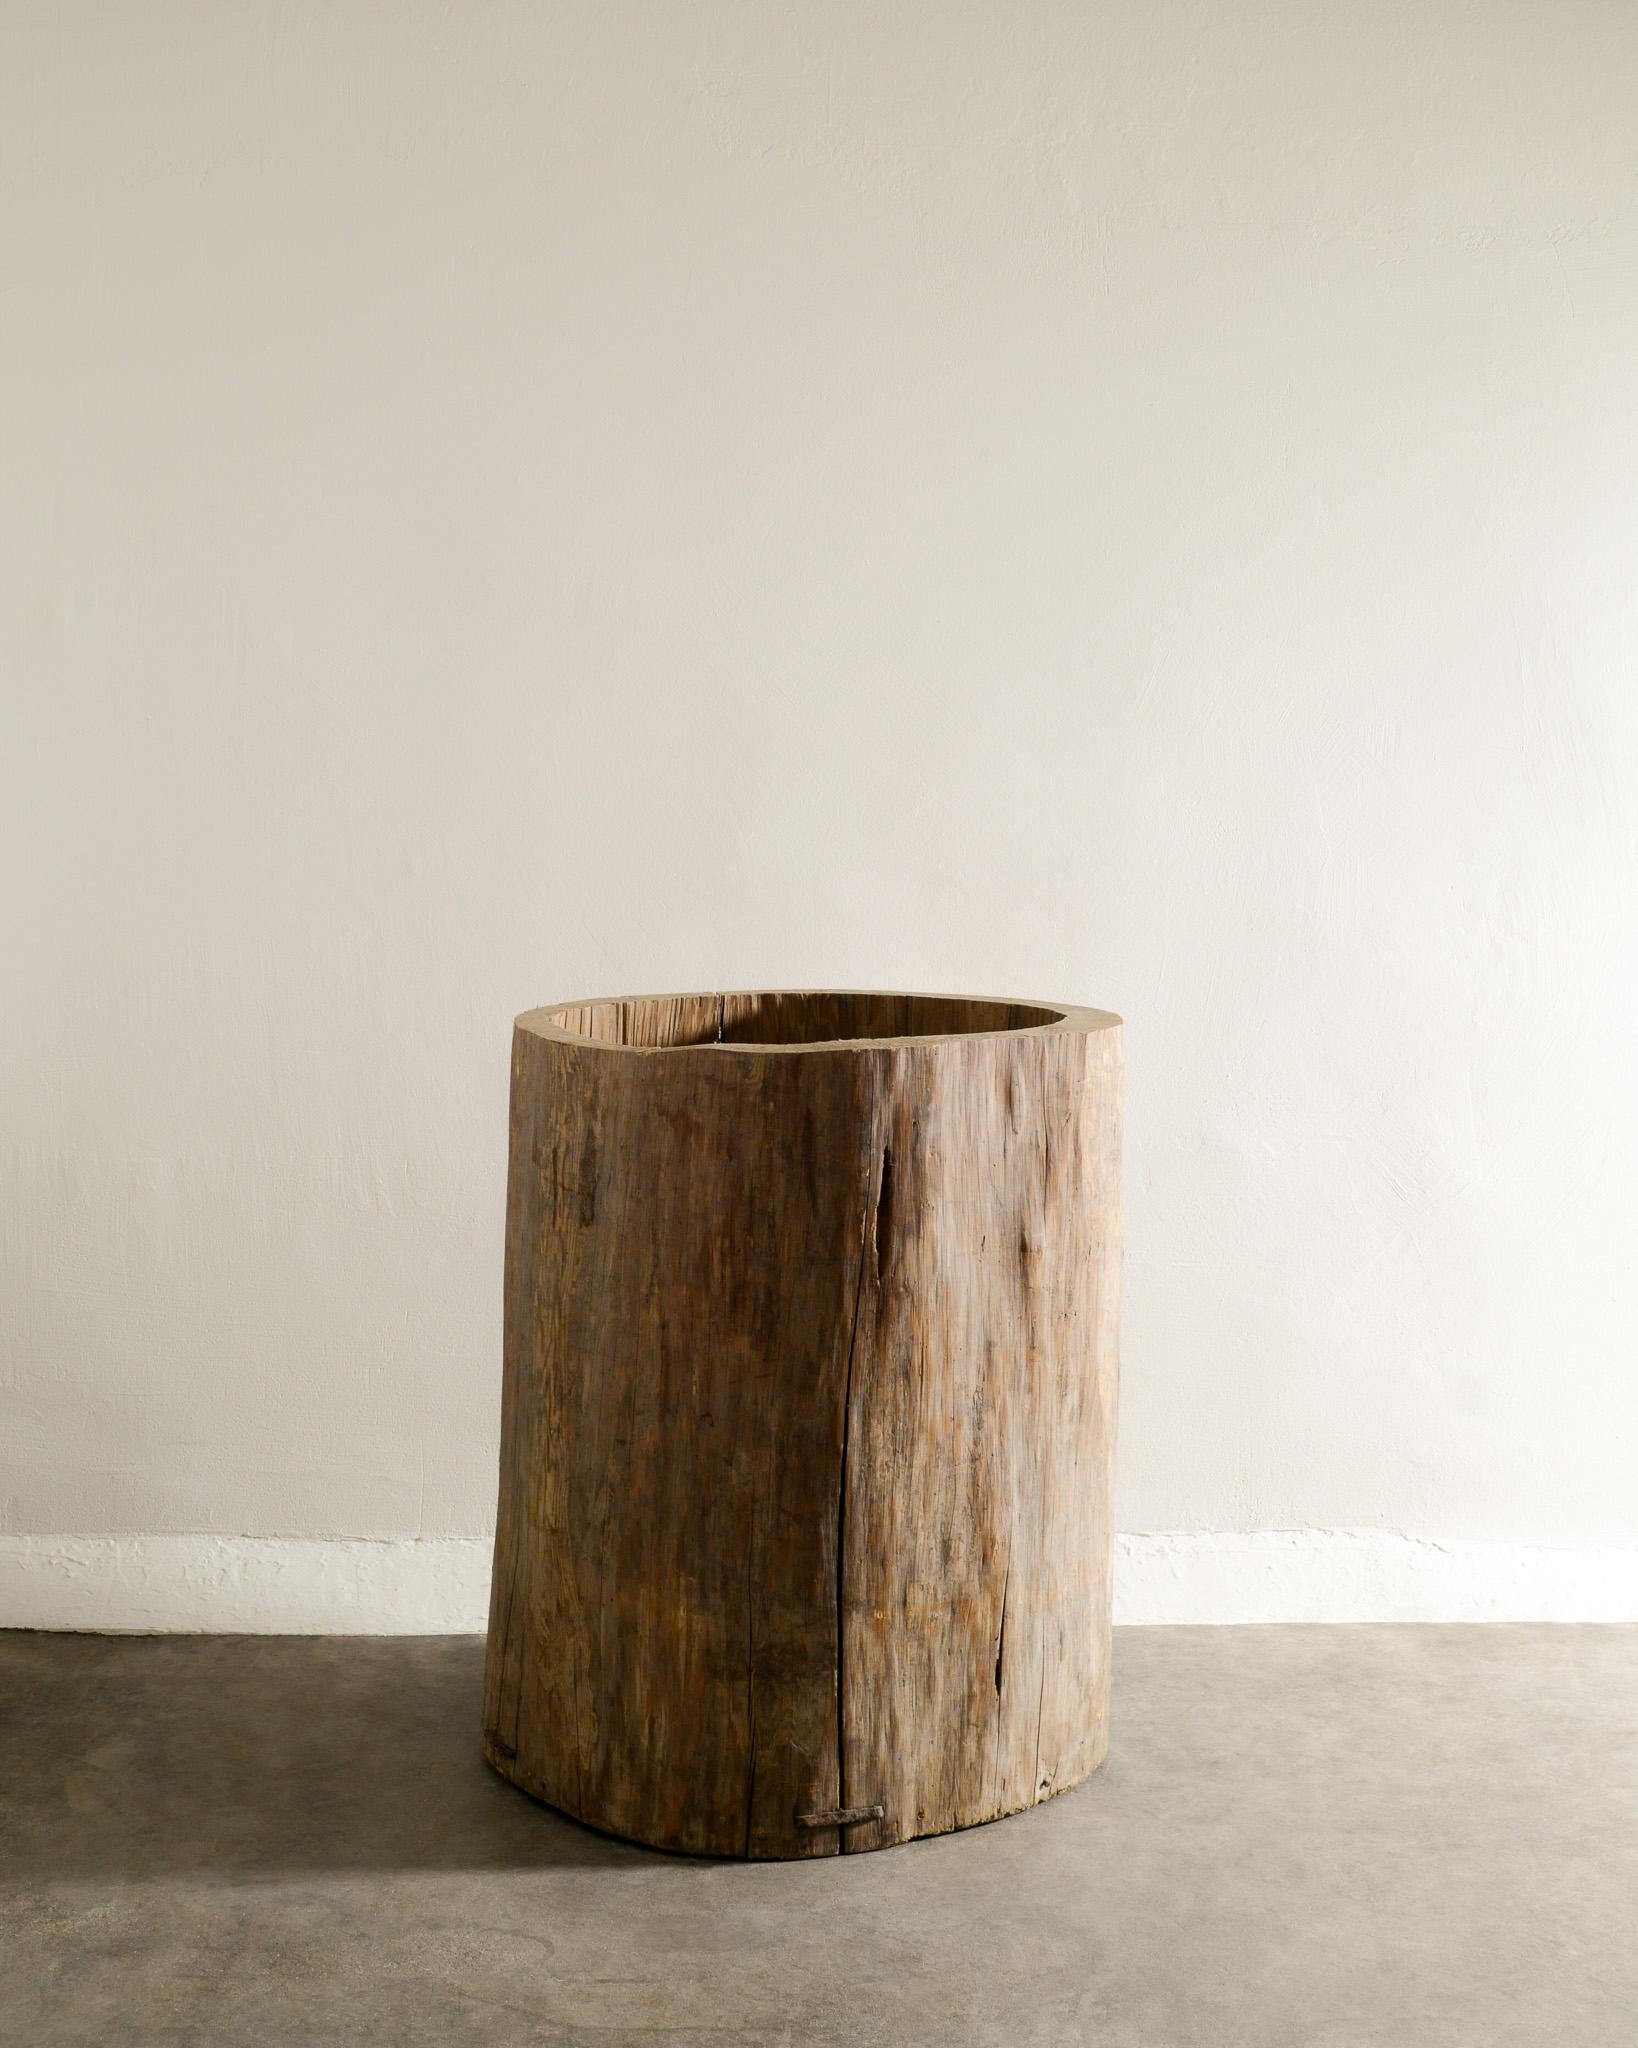 Rare and beautiful French antique hollowed out tree trunk wooden planter in a brutalist and wabi sabi style. Good and charmy condition with some old repairs. 

Dimensions: H: 86 cm / 34